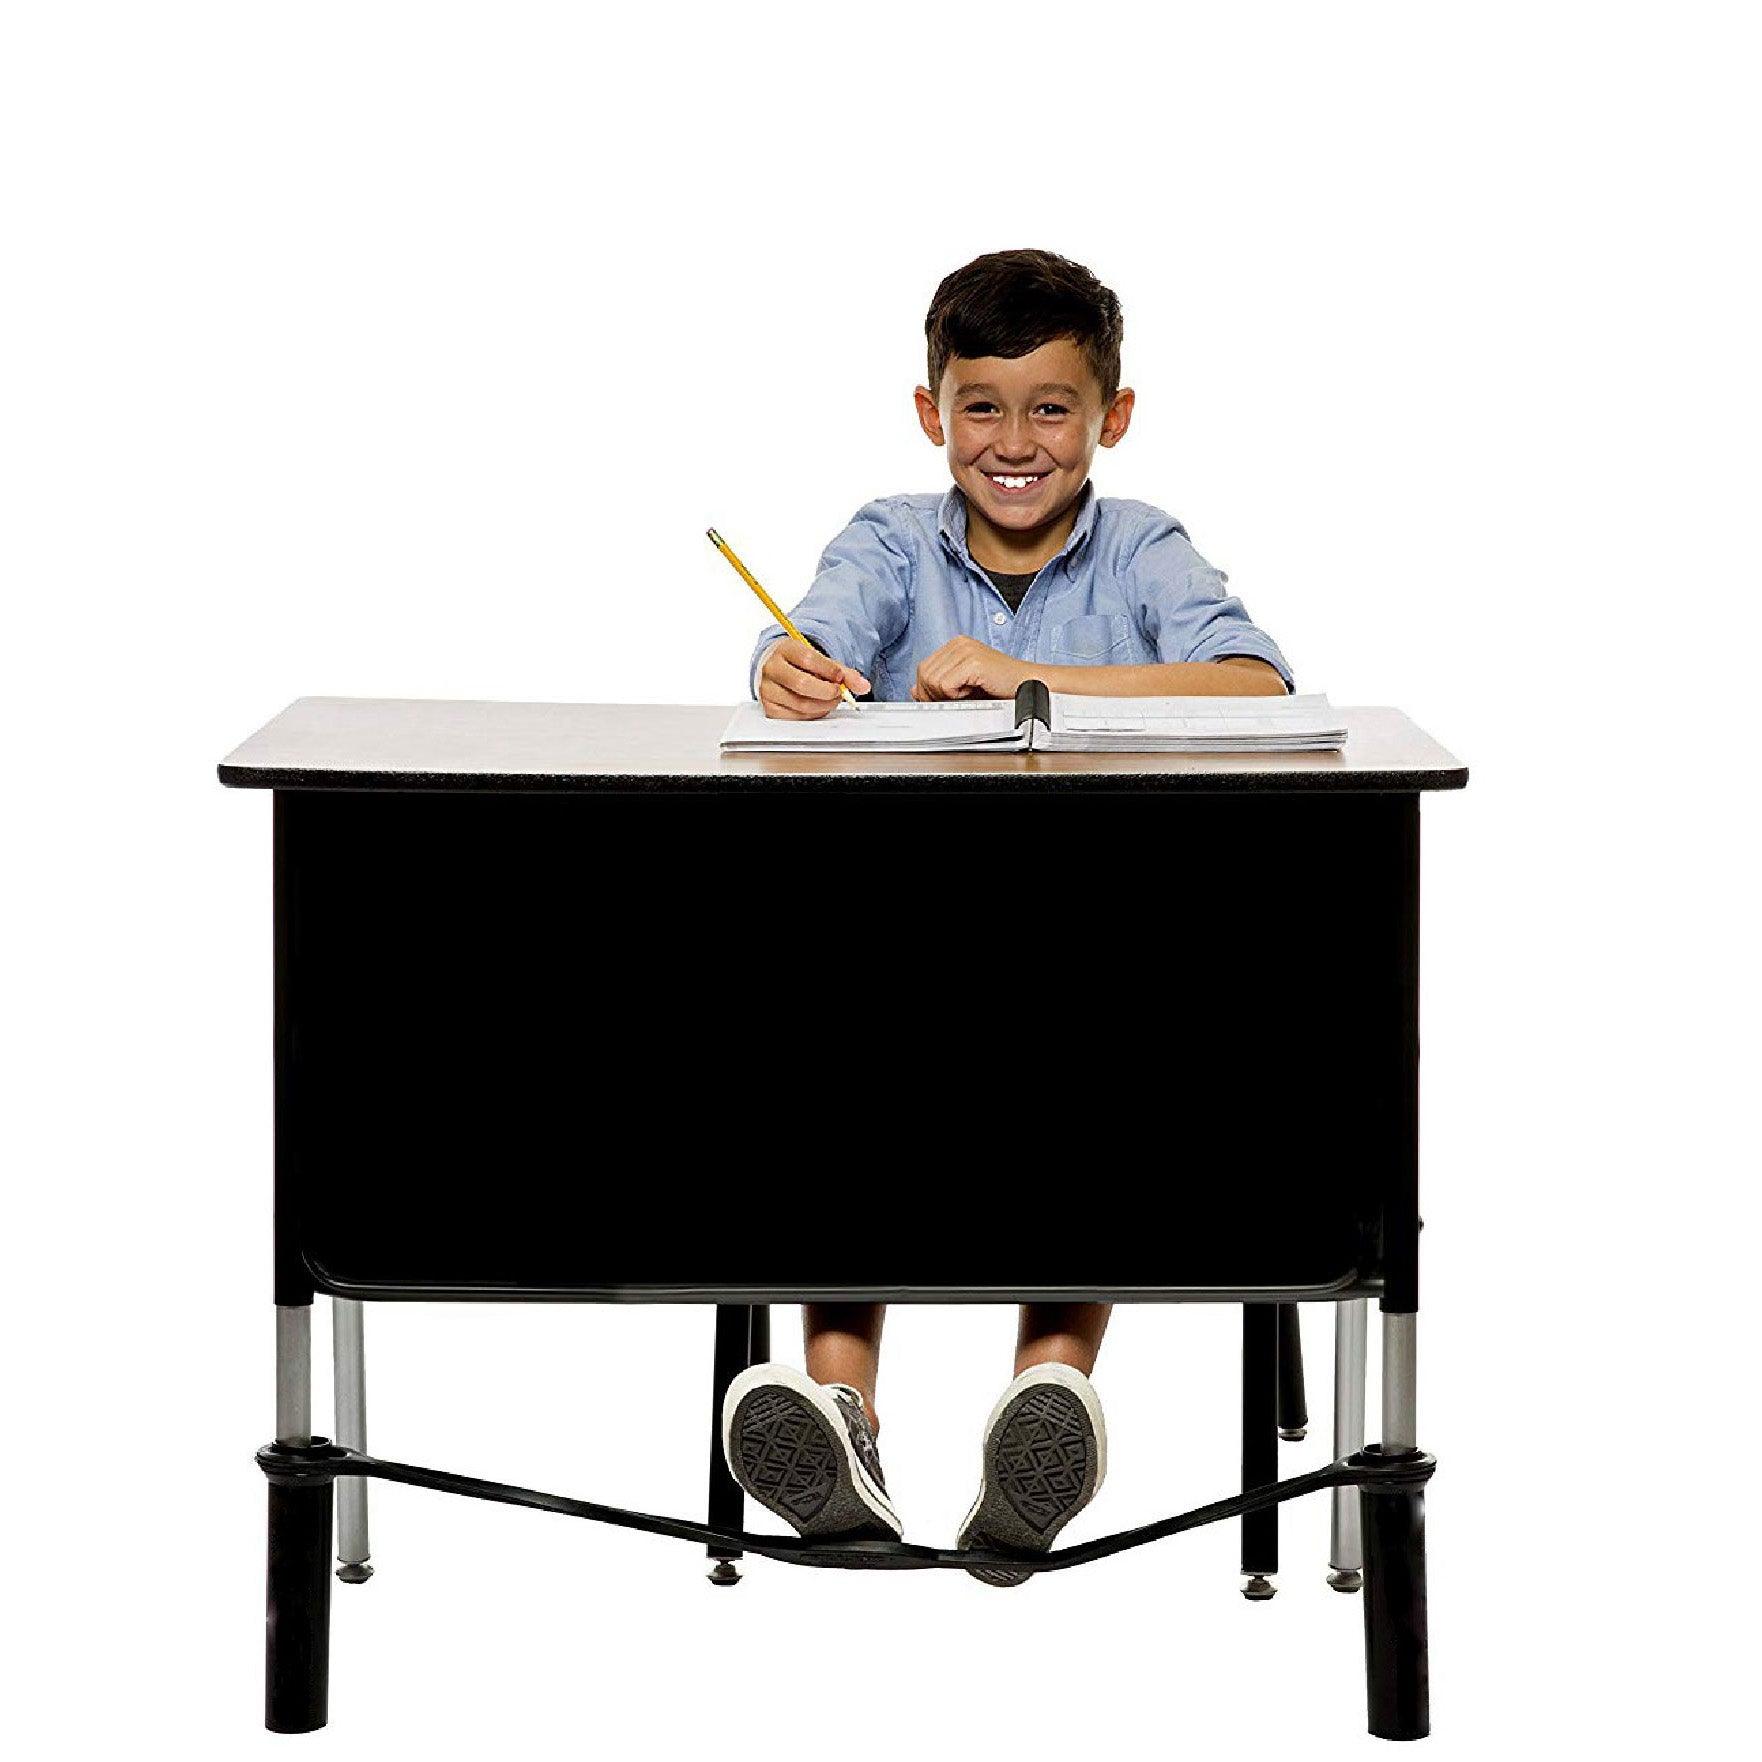 Chair Band for Extra-Wide School Desks, Black Tubes - Loomini